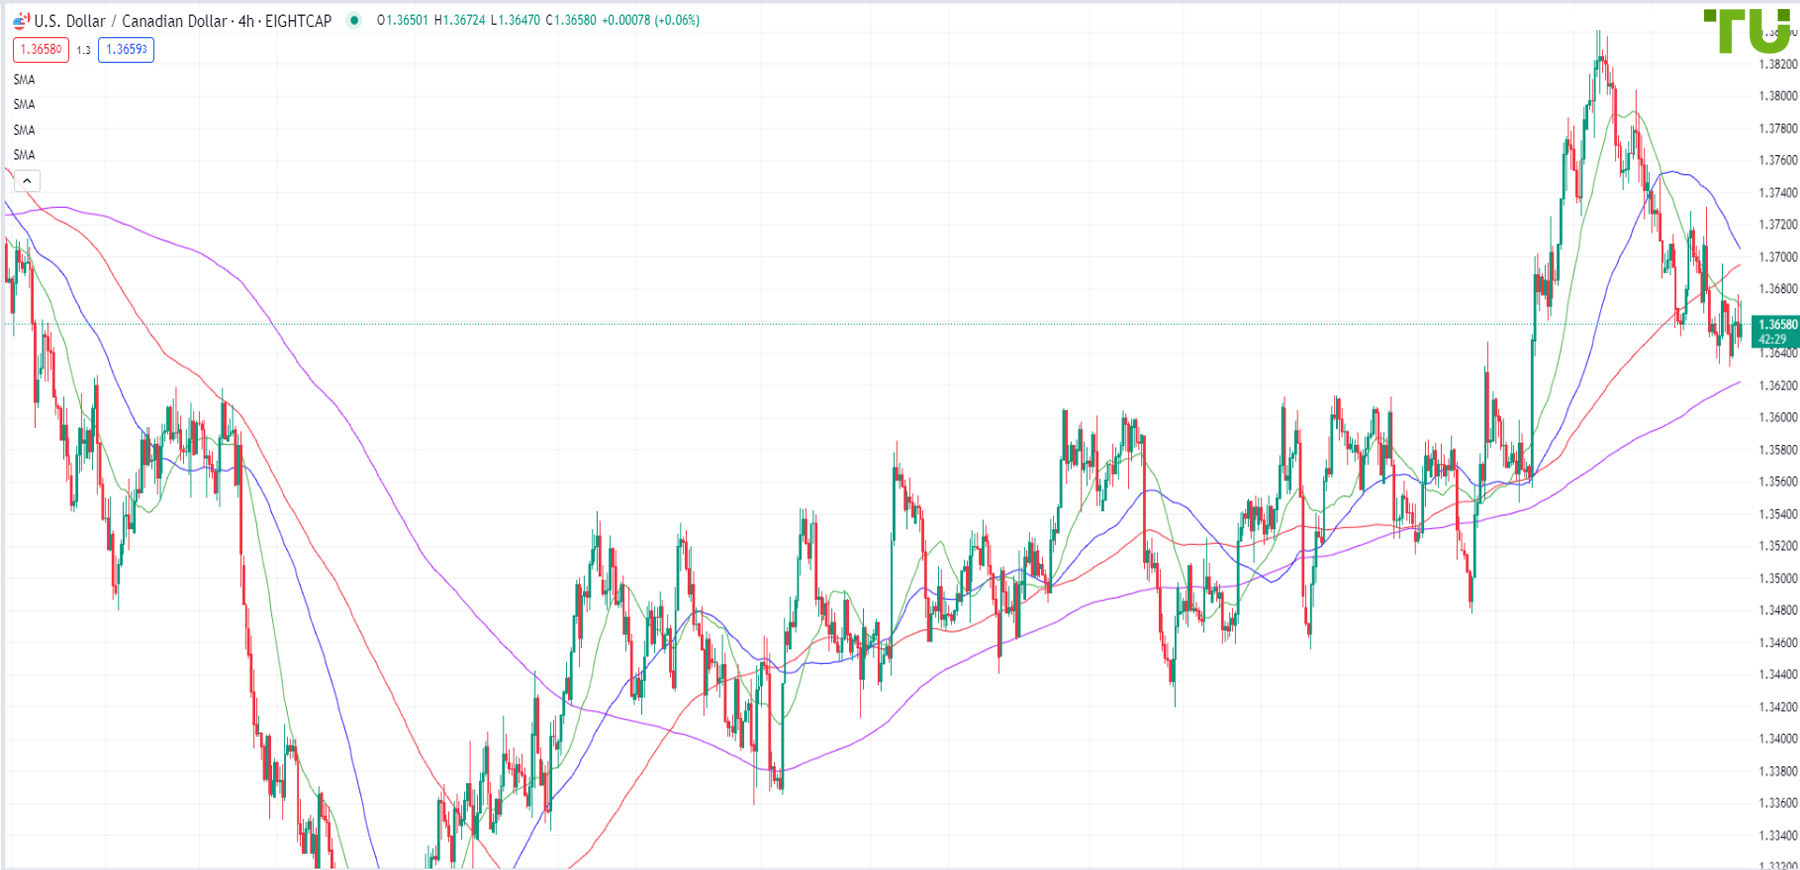 USD/CAD is under selling pressure